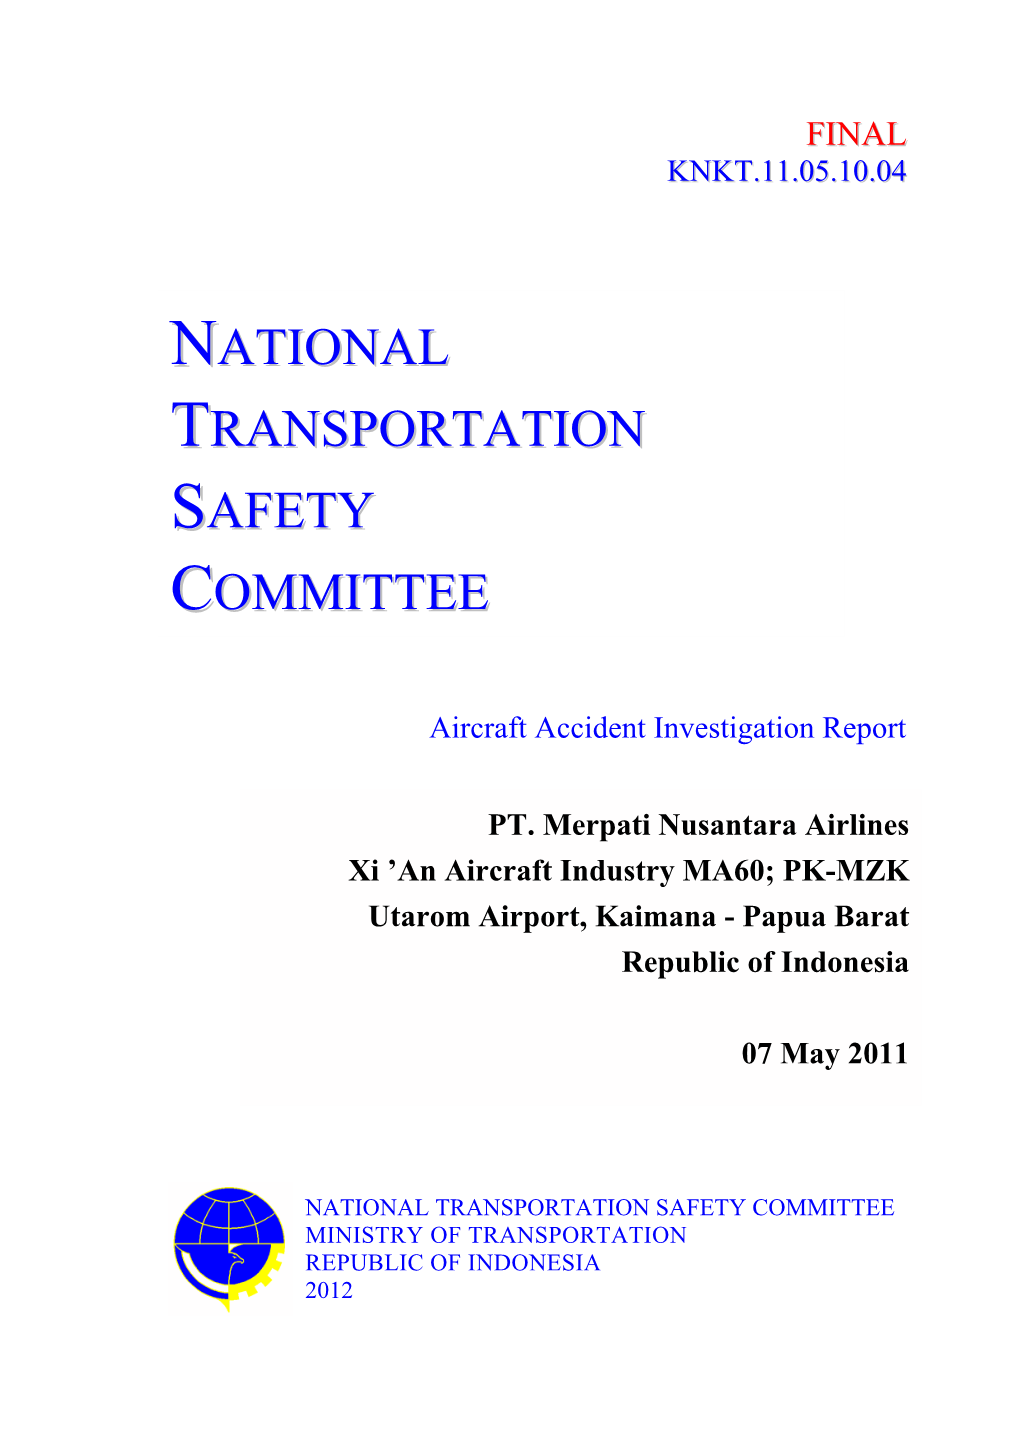 National Transportation Safety Committee Ministry of Transportation Republic of Indonesia 2012